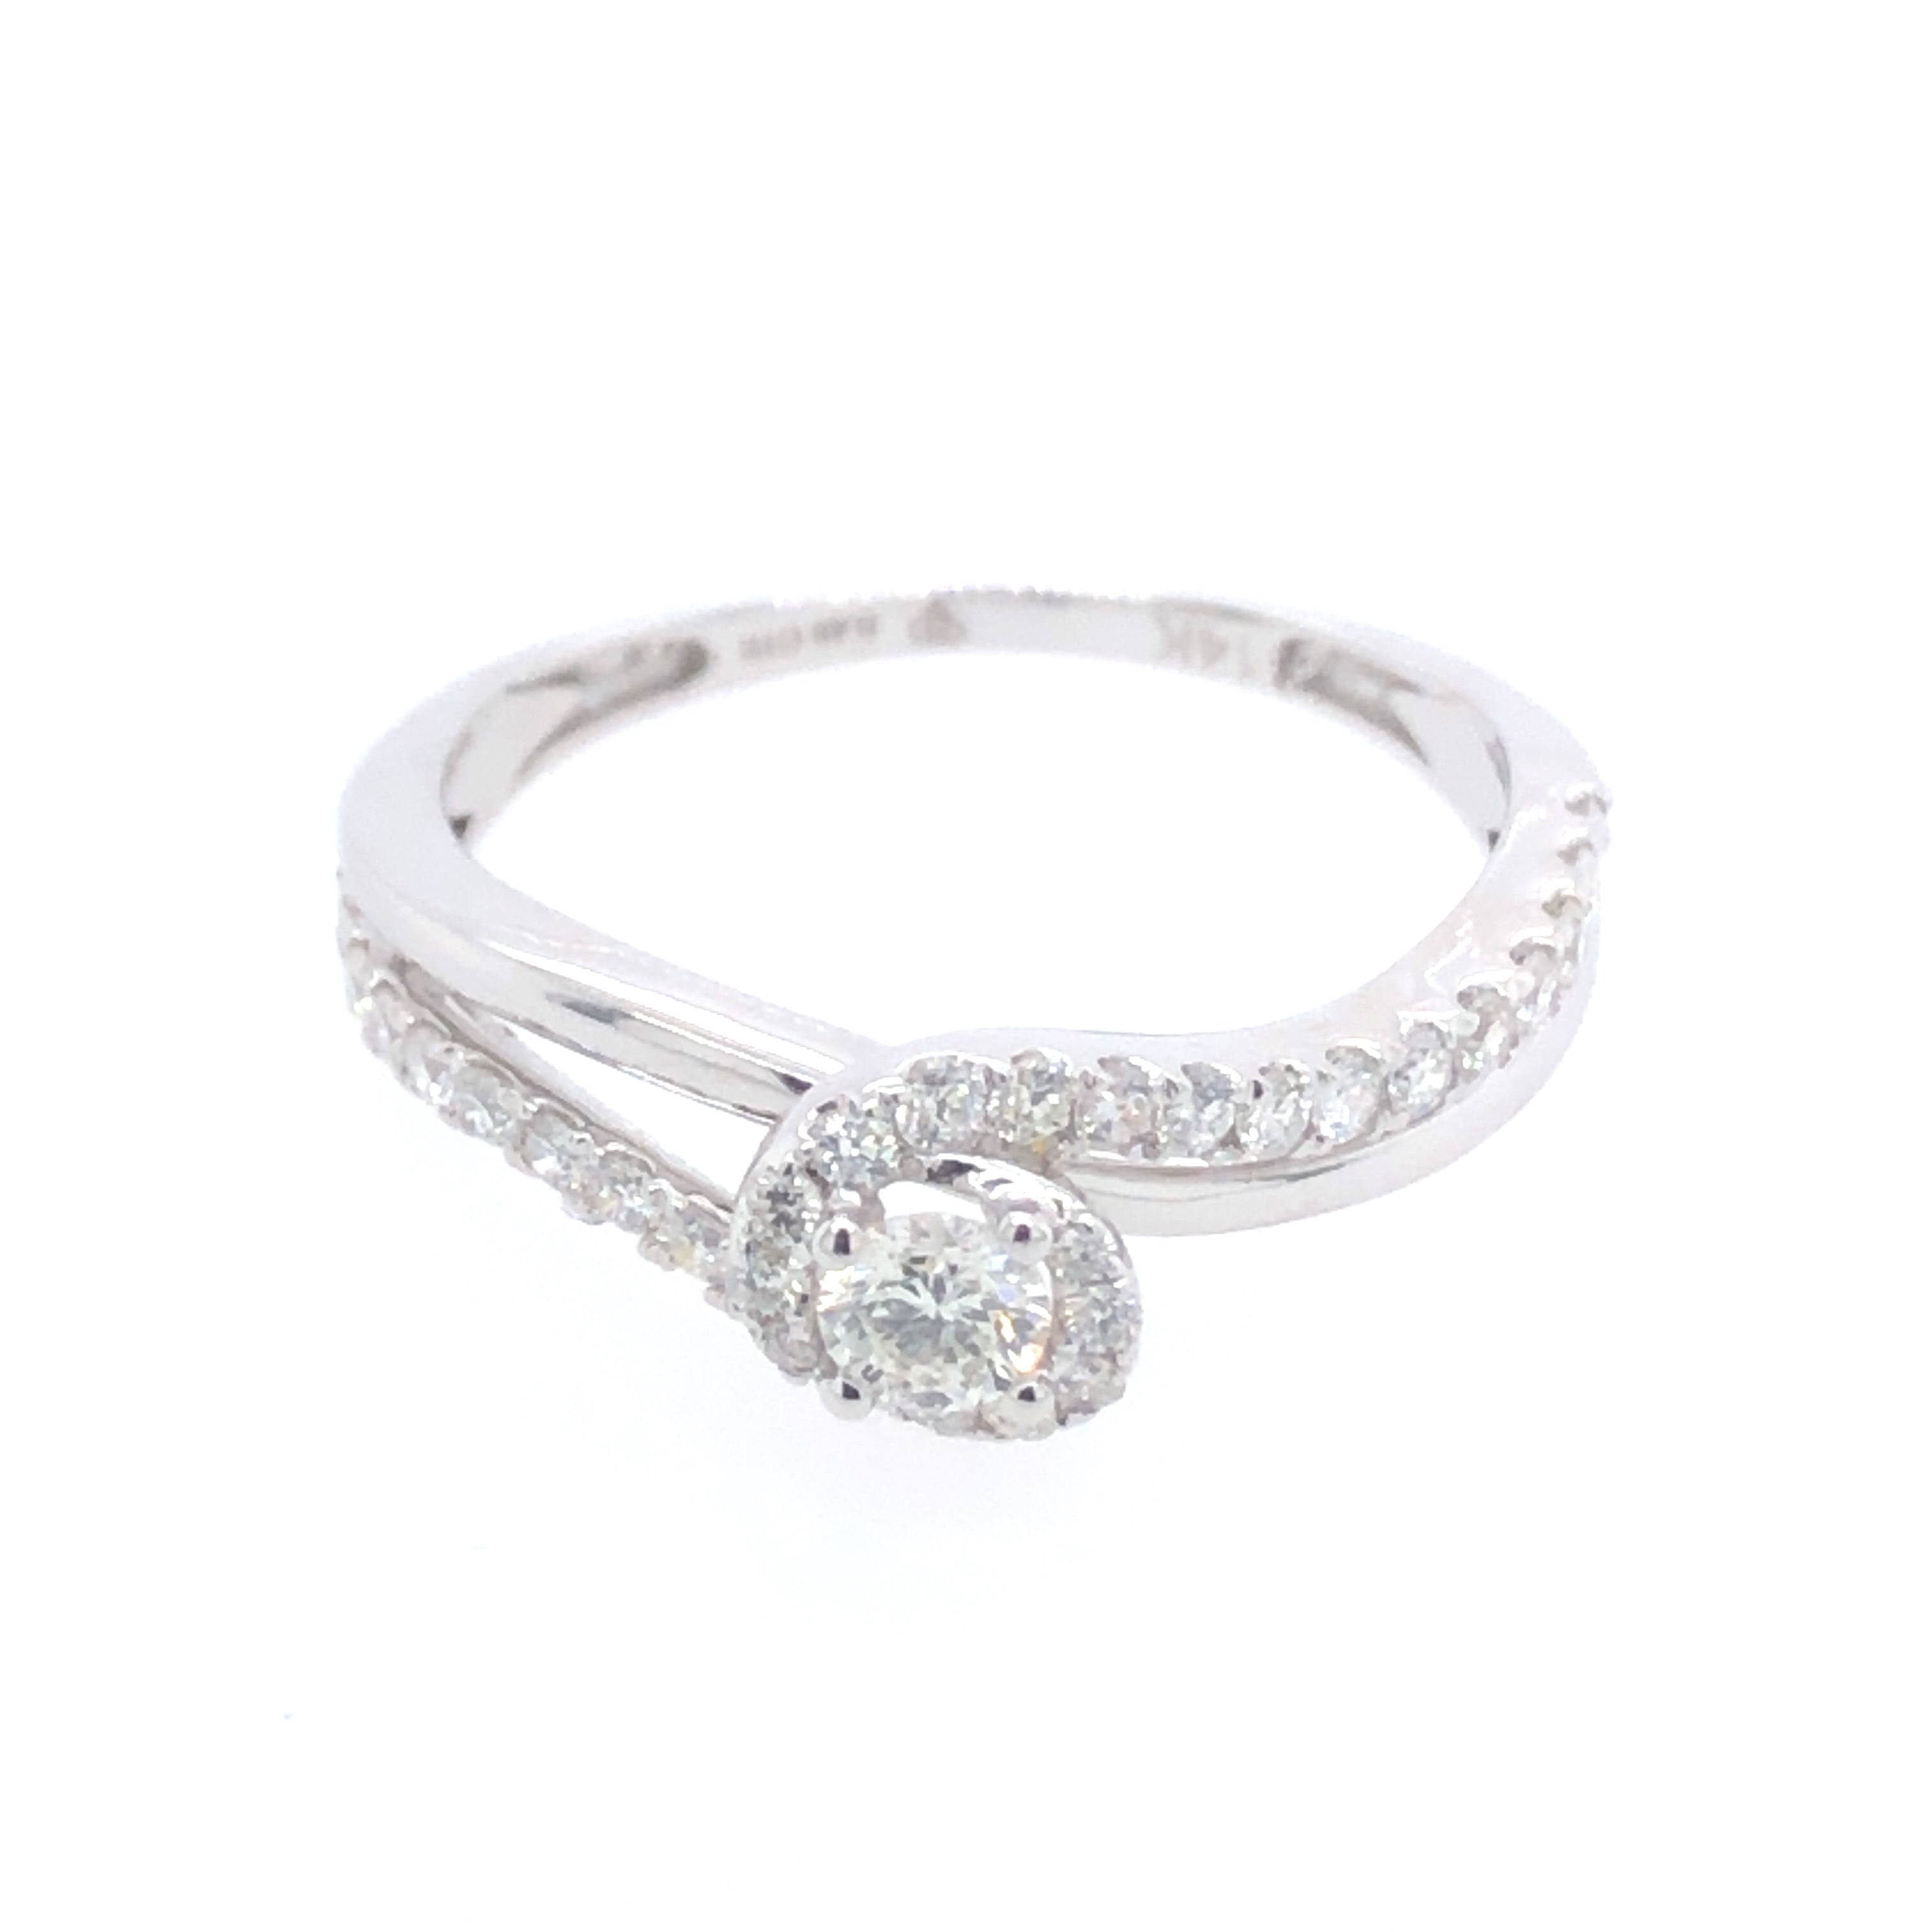 Entwined Engagement Ring - Diamond Engagement Rings